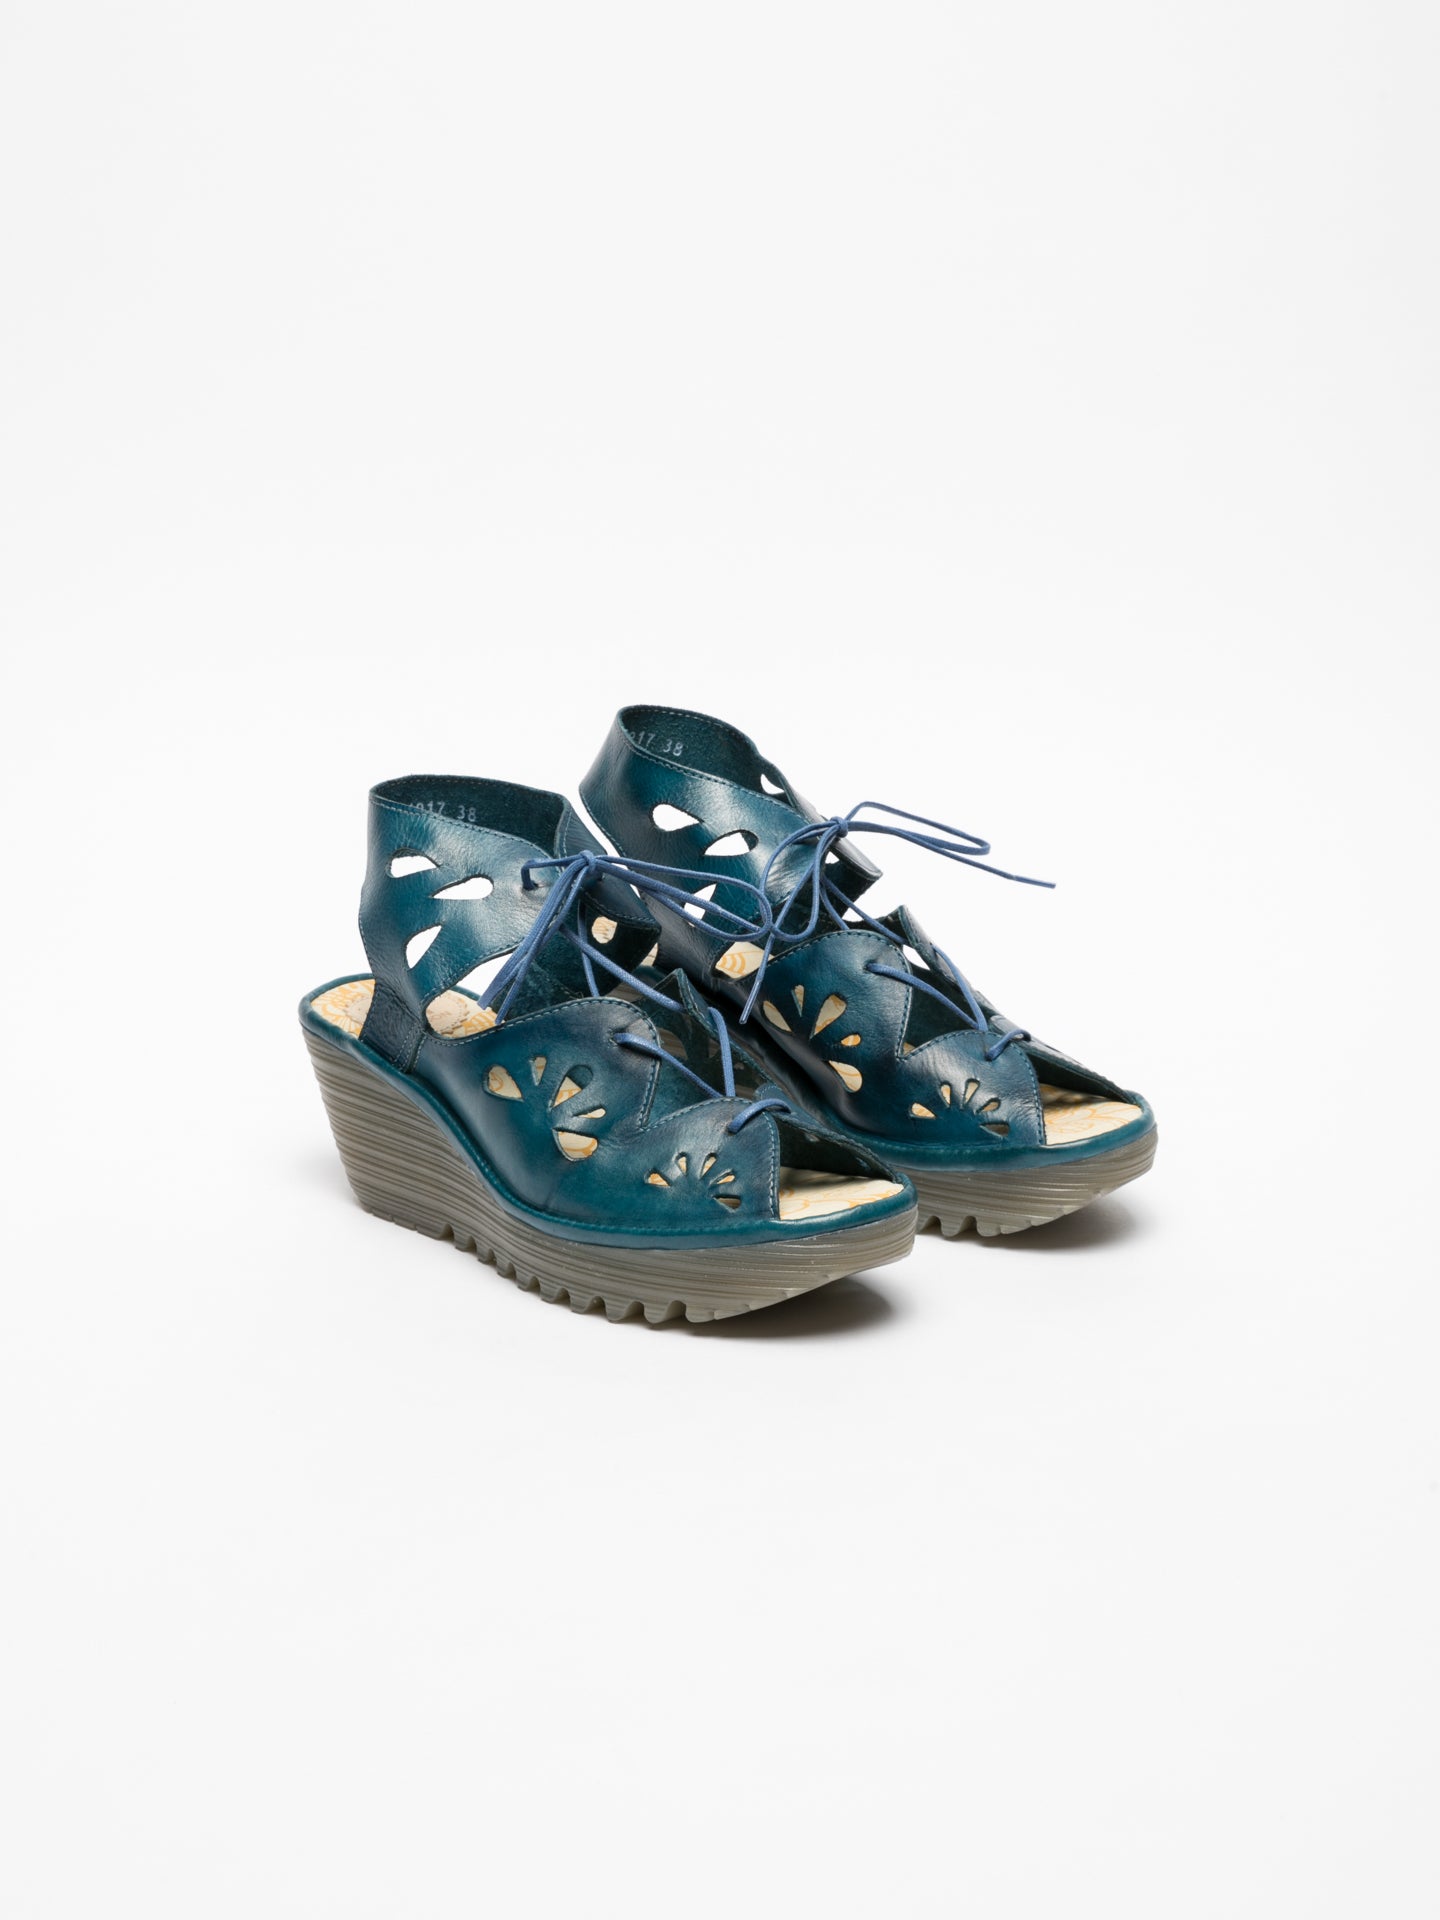 Fly London Blue Lace-up Sandals